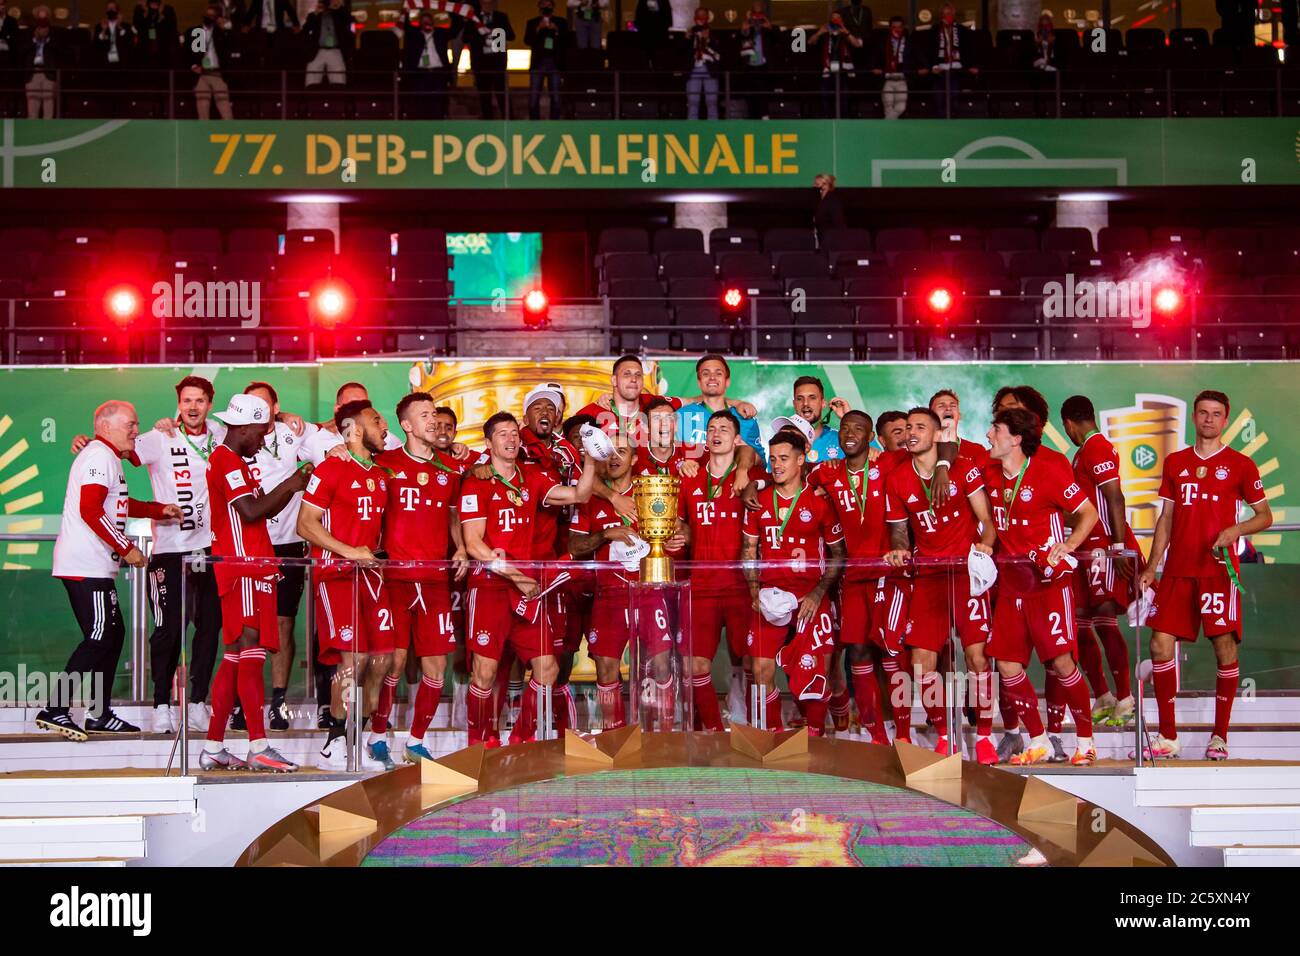 Berlin, Germany, 4 th July 2020,  winner ceremony: Leon GORETZKA, FCB 18 Benjamin PAVARD, FCB 5 Robert LEWANDOWSKI, FCB 9 Ivan PERISIC, FCB 14 FCB Co-Trainer Hermann GERLAND, Lucas HERNANDEZ (FCB 21) Thomas MUELLER, MÜLLER, FCB 25 with trophy at the DFB Pokal Final match  FC BAYERN MUENCHEN - BAYER 04 LEVERKUSEN 4-2  in season 2019/2020 , FCB Foto: © Peter Schatz / Alamy Live News / Kevin Voigt/Jan Huebner/Pool   - DFB REGULATIONS PROHIBIT ANY USE OF PHOTOGRAPHS as IMAGE SEQUENCES and/or QUASI-VIDEO -  National and international News-Agencies OUT Editorial Use ONLY Stock Photo